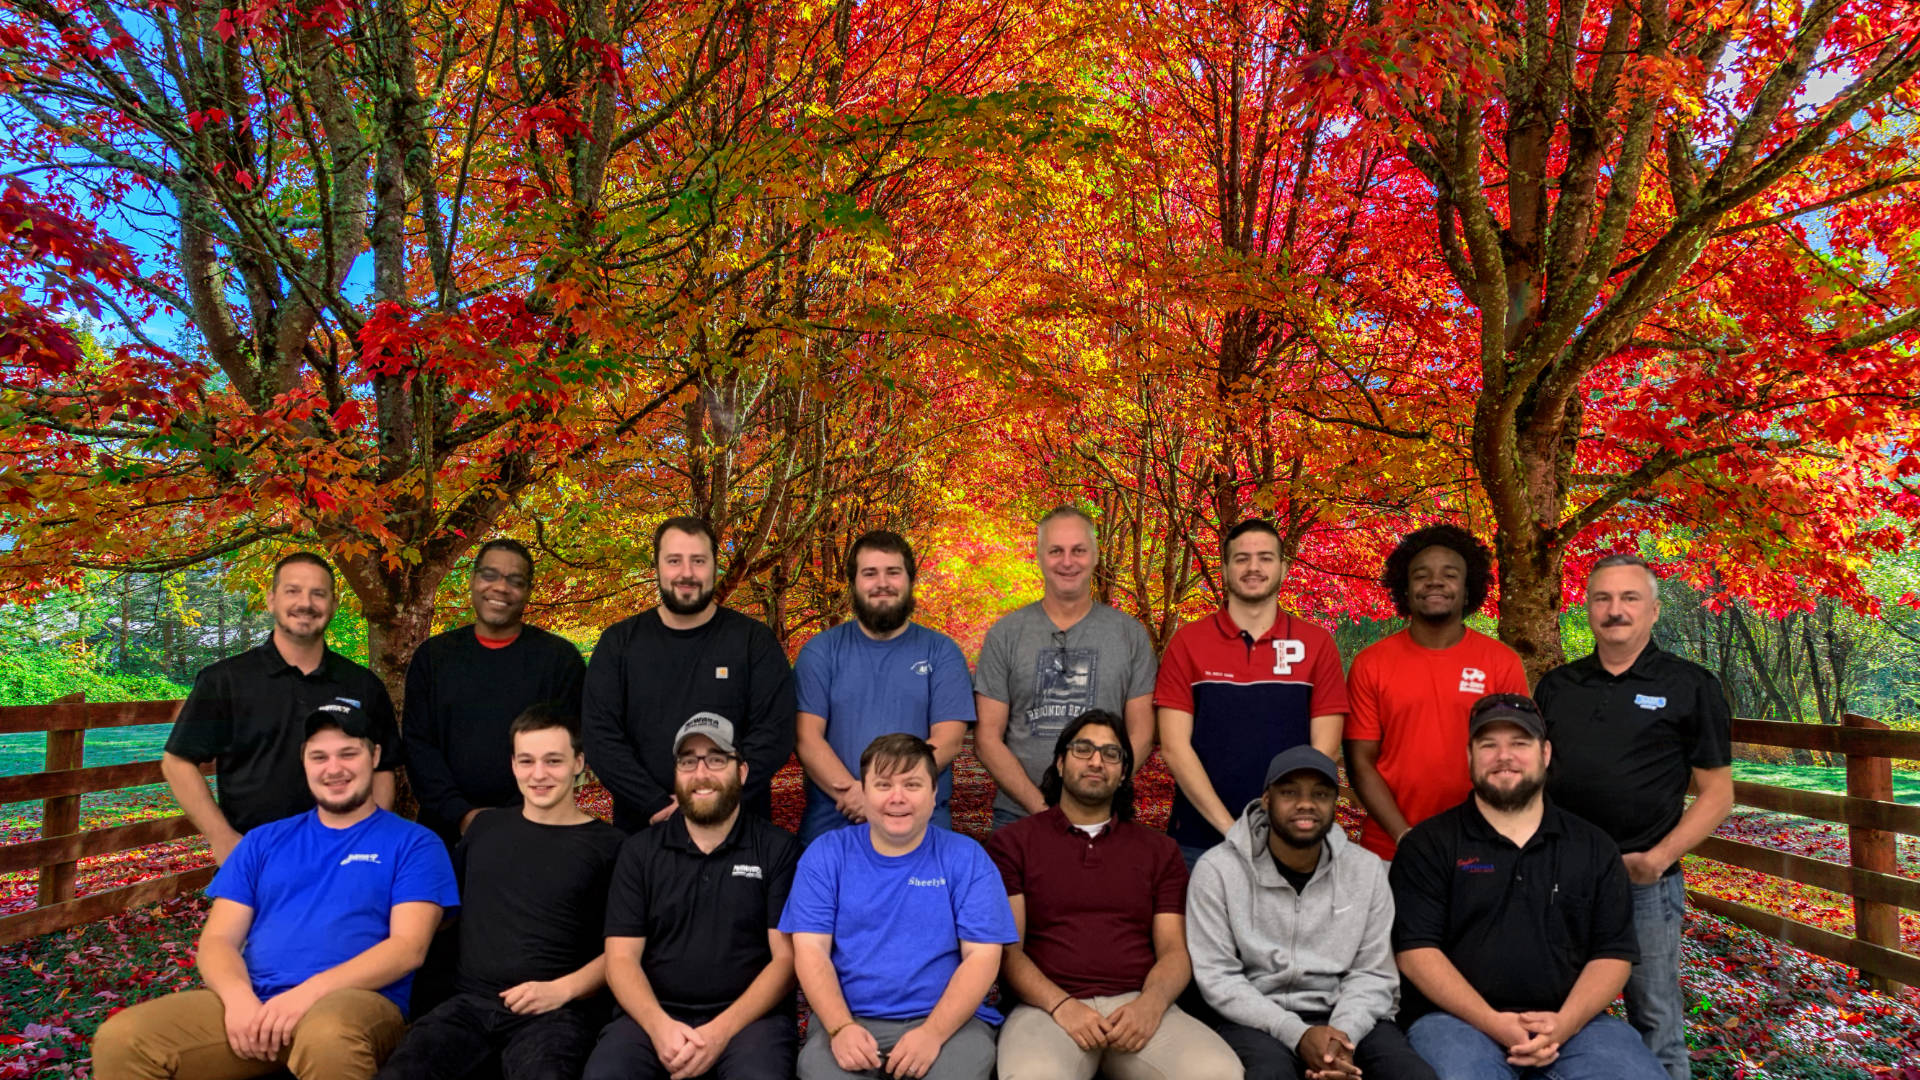 Featured image for “Congrats to our graduating September 2019 class”